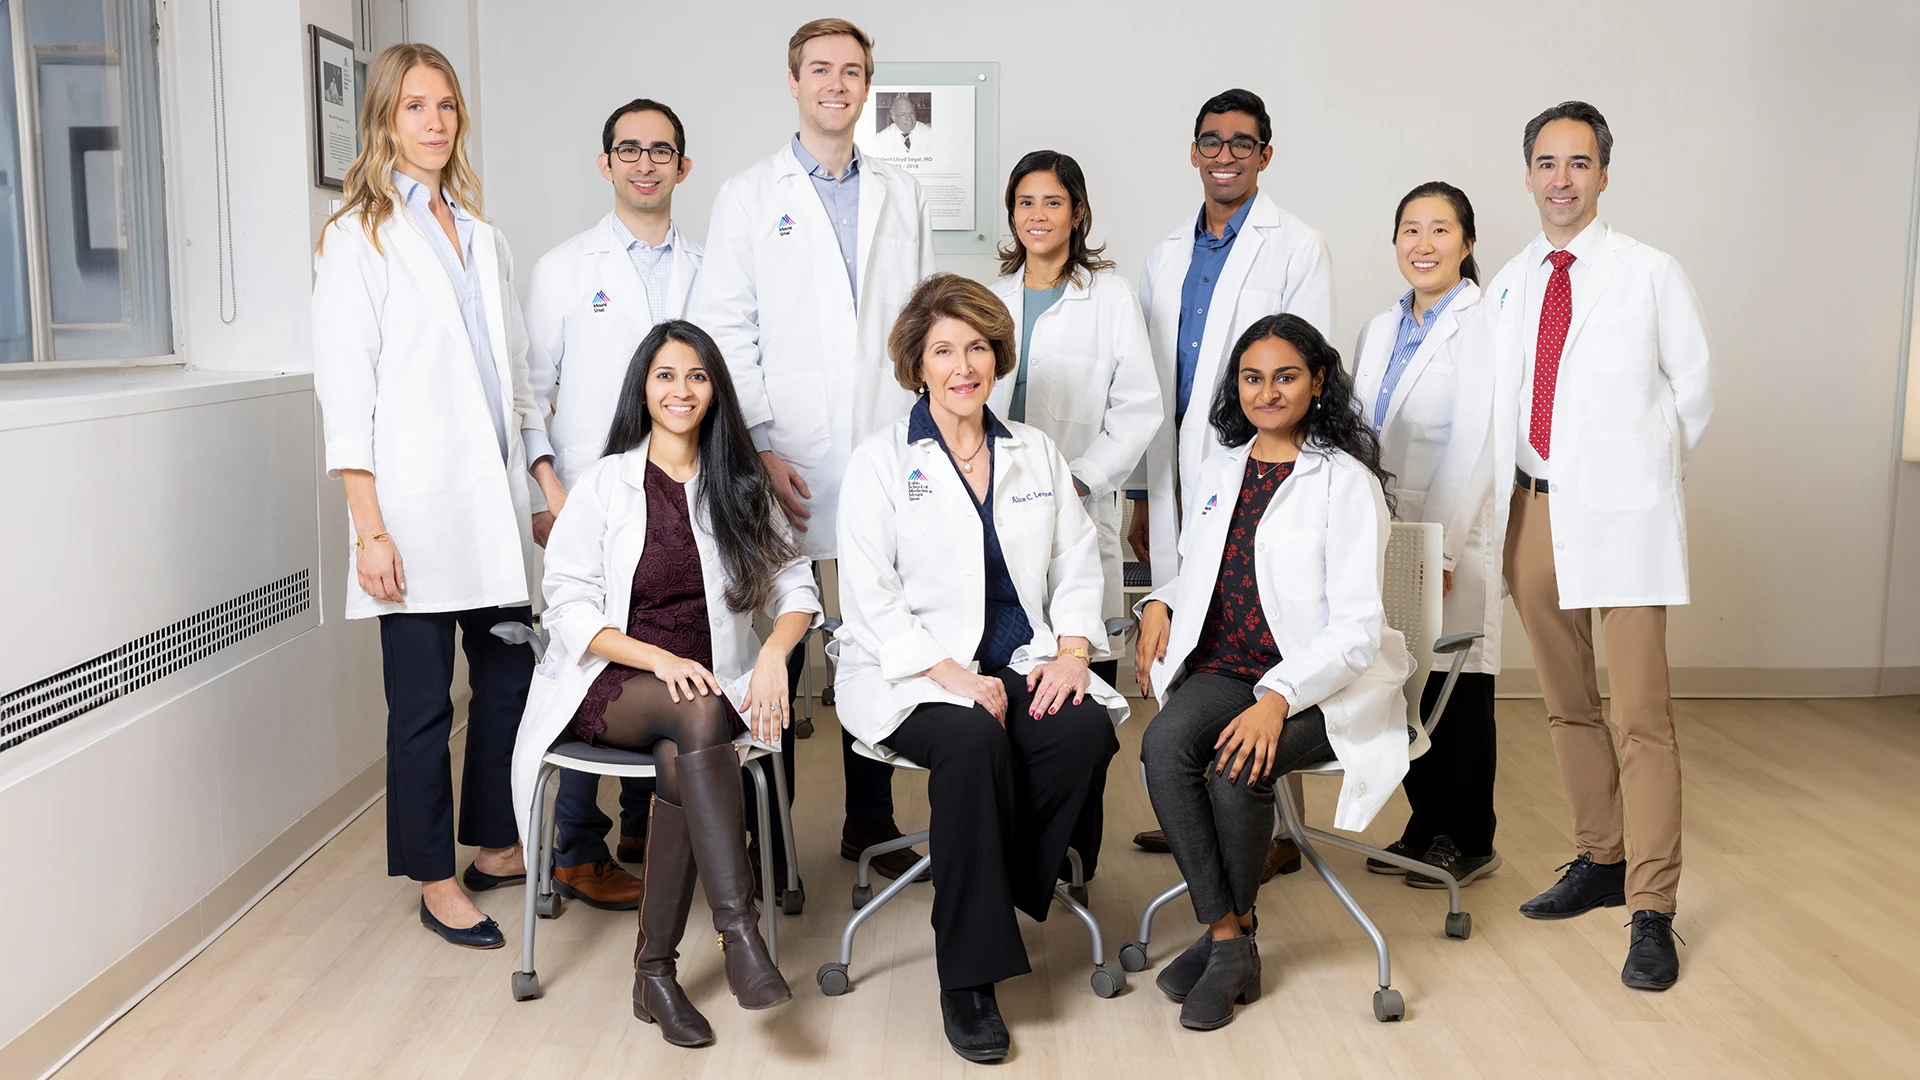 Members of the Endocrinology, Diabetes and Bone Disease Fellowship Program: Front row, from left, Sandhya Bassin, MD, Director Alice C. Levine, MD, and Suma Gondi, MD. Back row, from left, Rachel Sheskier, MD, Alon Mazori, MD, Daniel Slack, MD, Natalia Viera Feliciano, MD, Jiby Yohannan, MD, Jane Hand, MD, and Co-Director Michael A. Via, MD